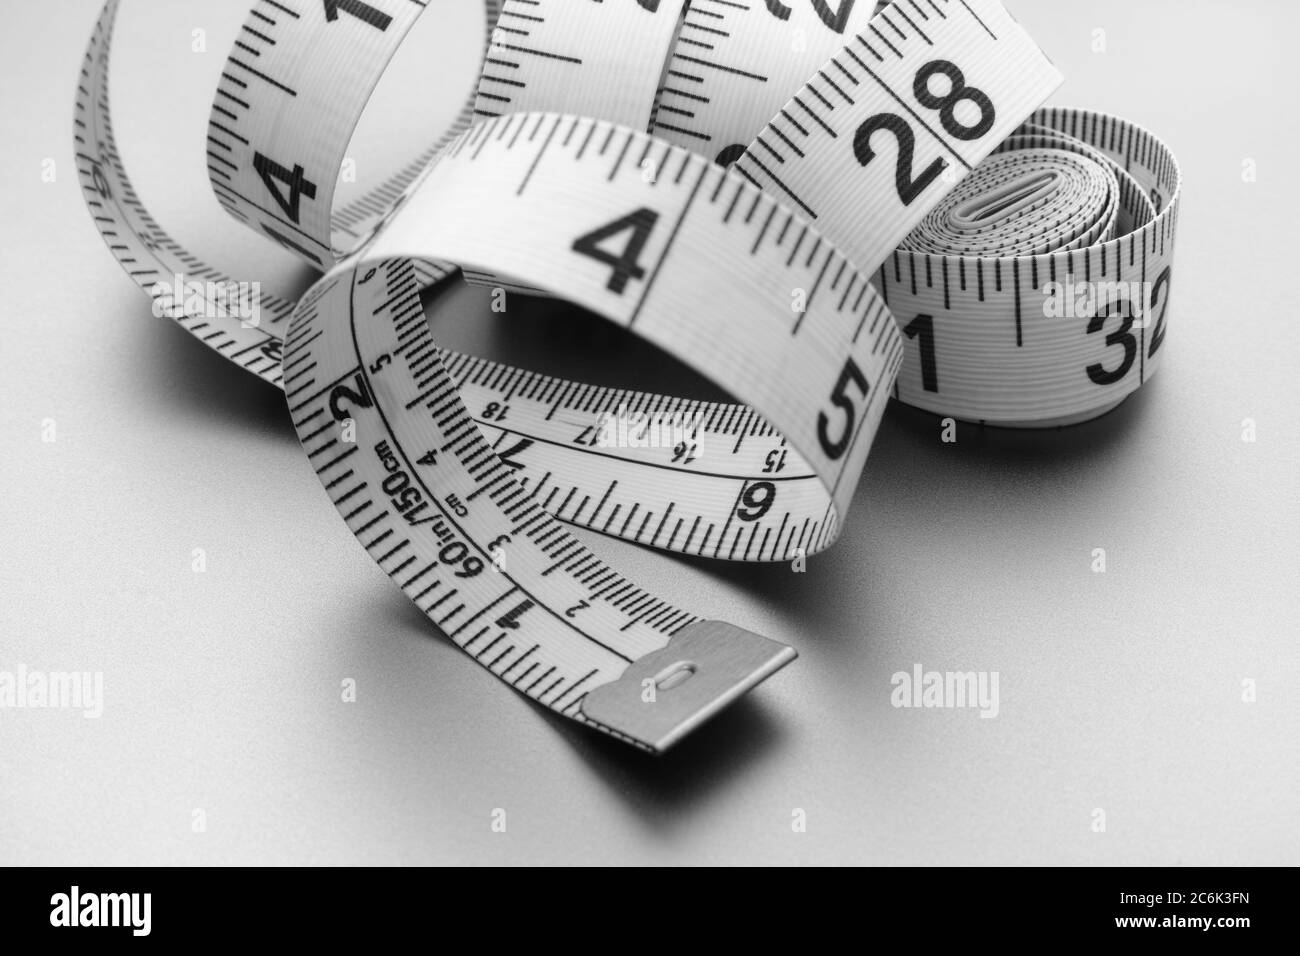 Human Height Measurement Tool in Centimeter, 0 - 140 Centimeter in Black  and White Color Isolated on White Background. Stock Illustration -  Illustration of line, growth: 121875605